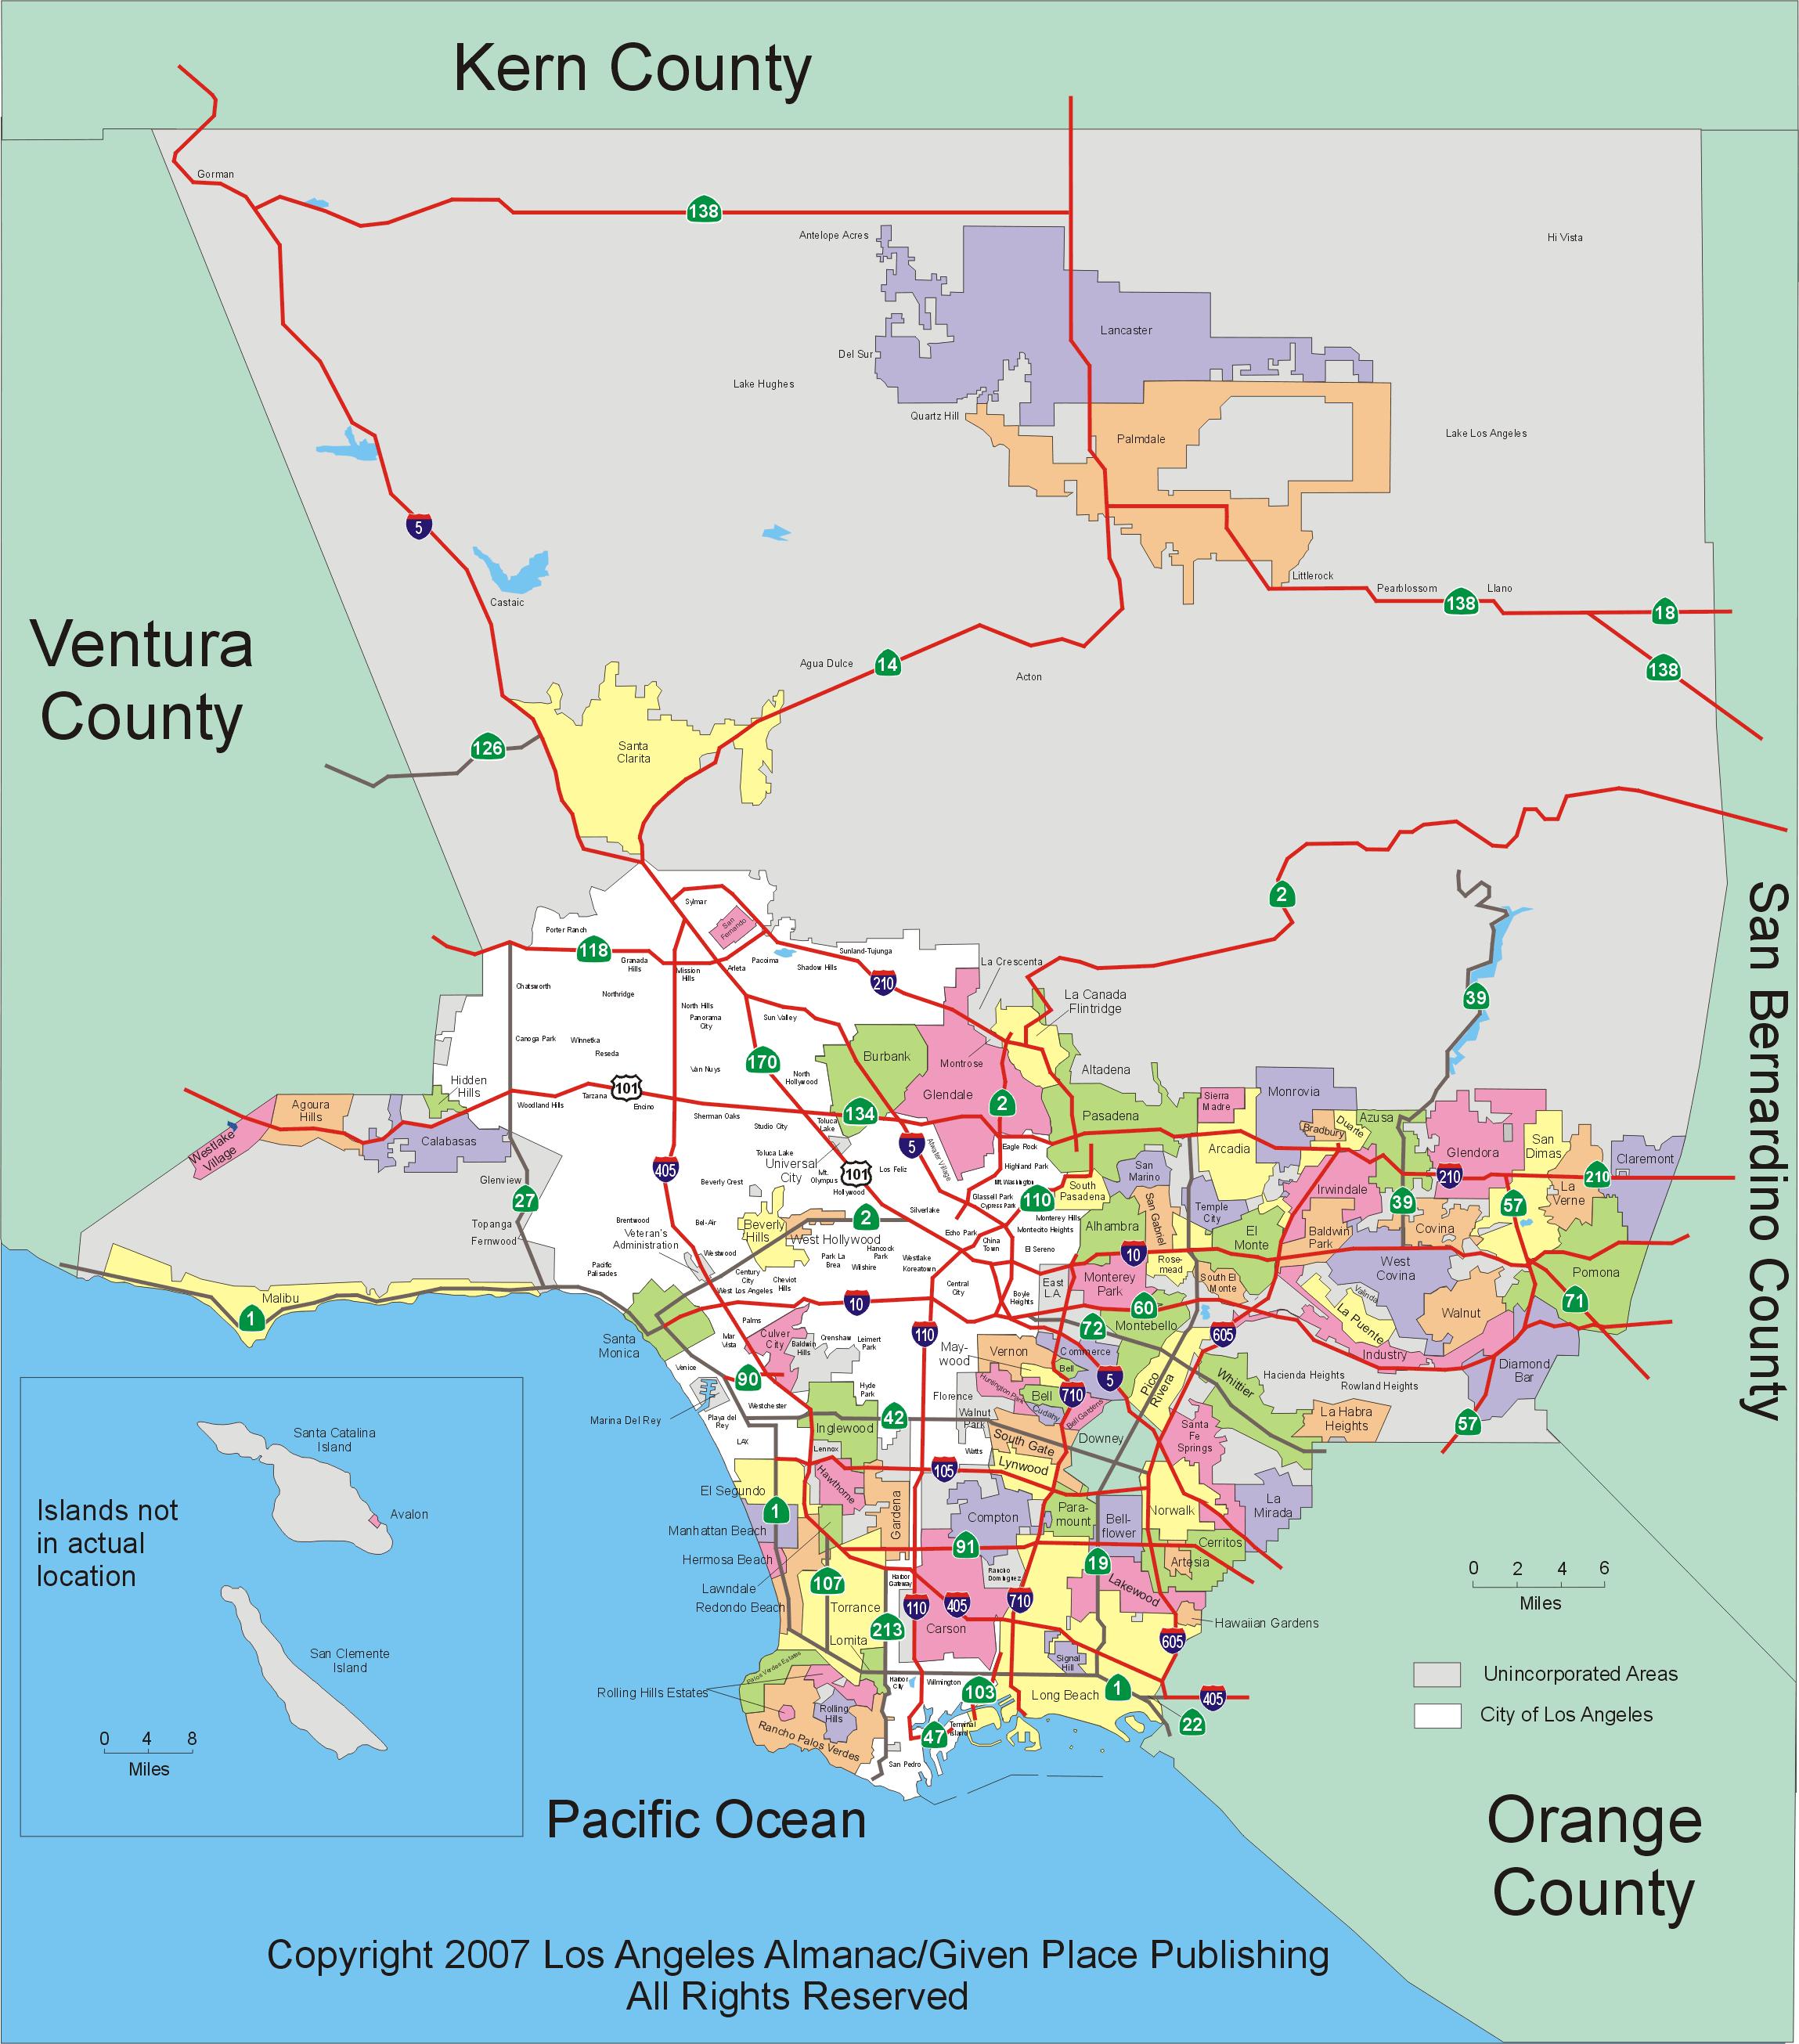 LA county zoning map - Los Angeles county zoning map (California - USA)